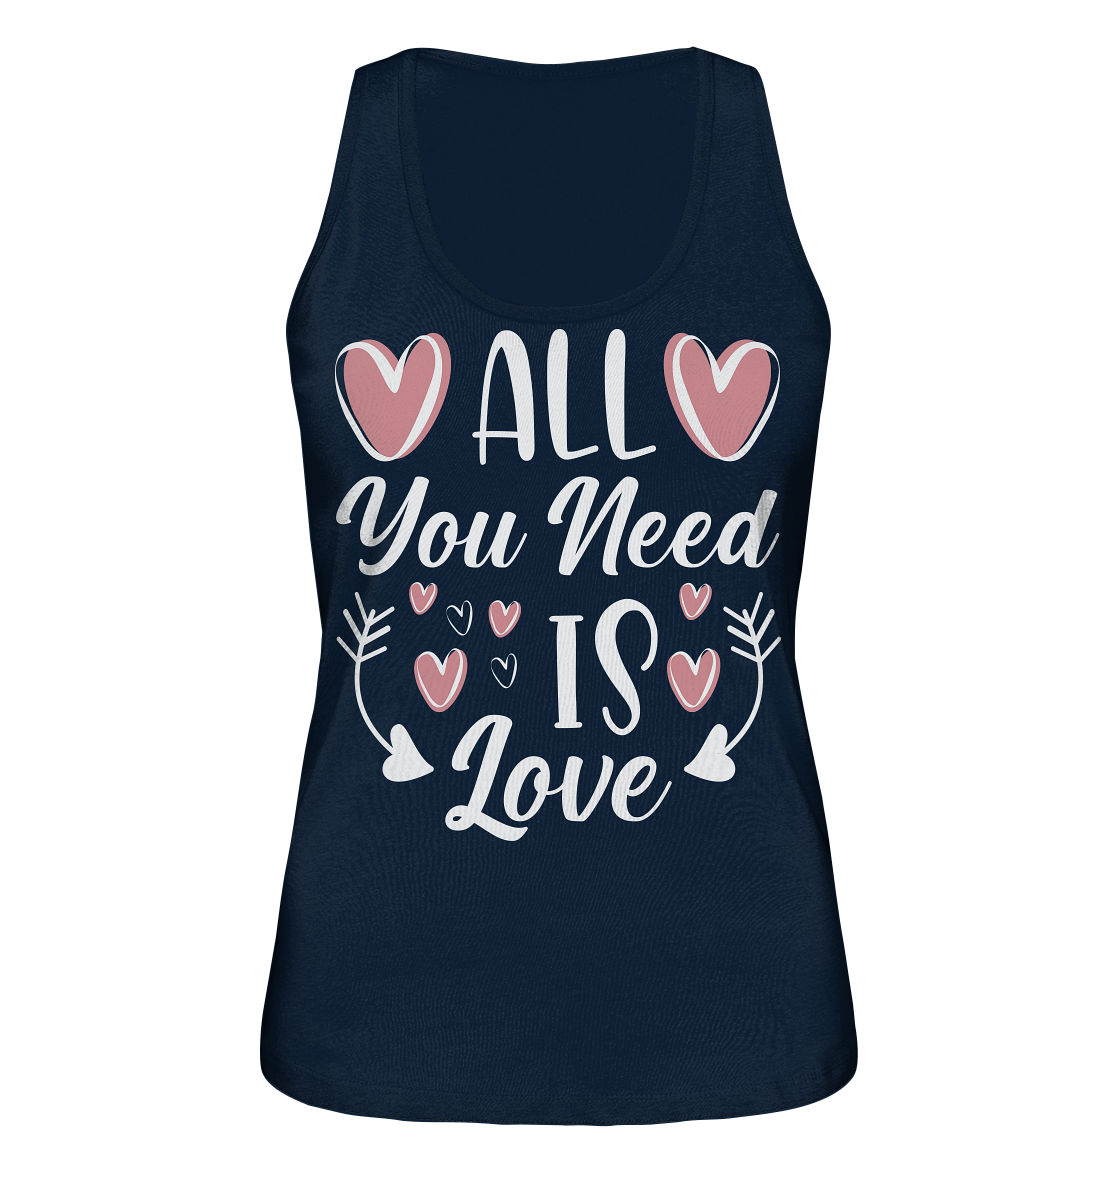 All You need is Love - Ladies Organic Tank-Top